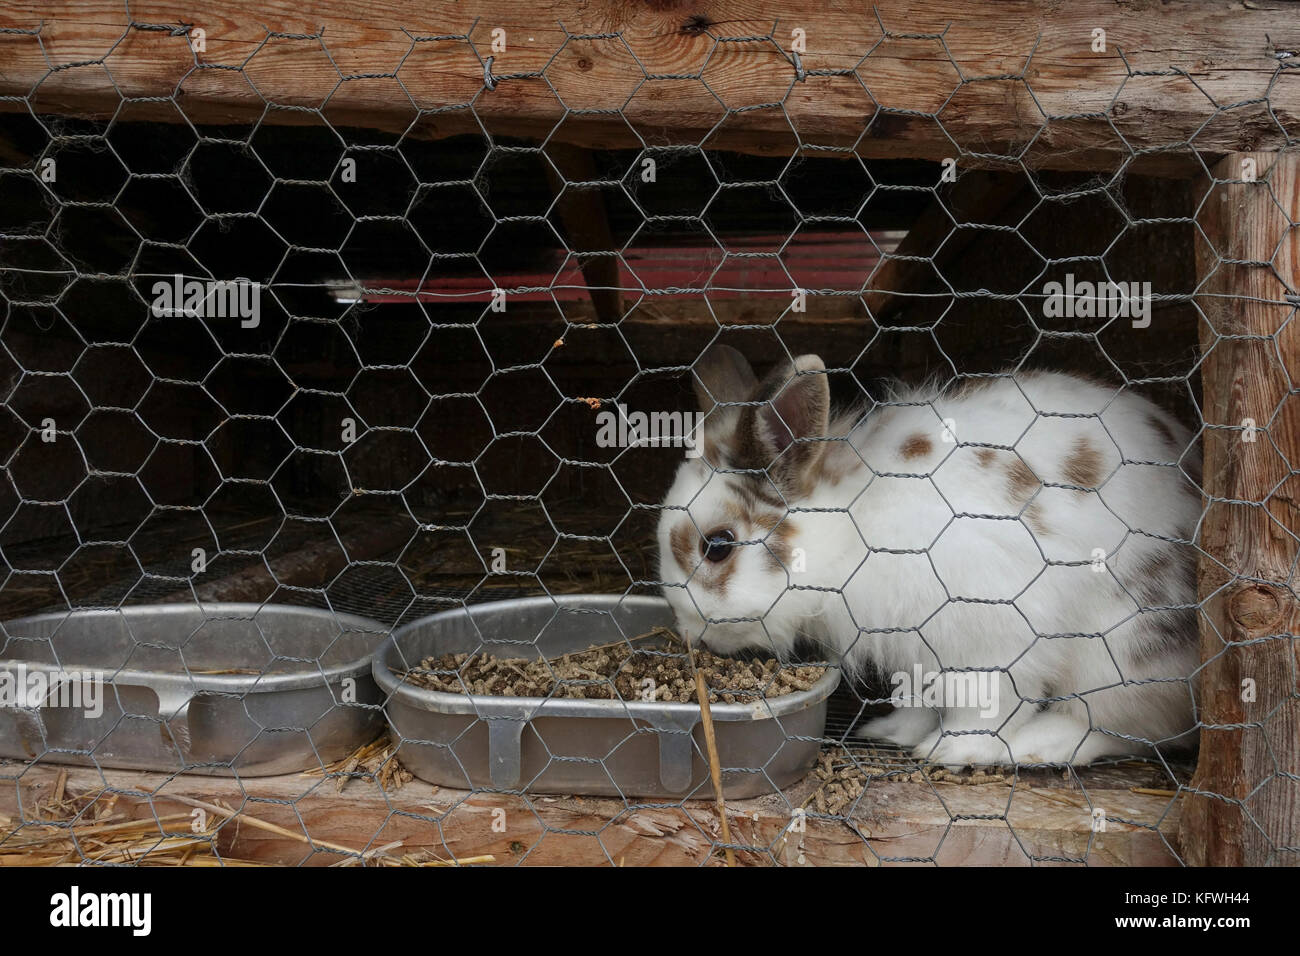 Farm rabbit in hutch, cage eating. Stock Photo